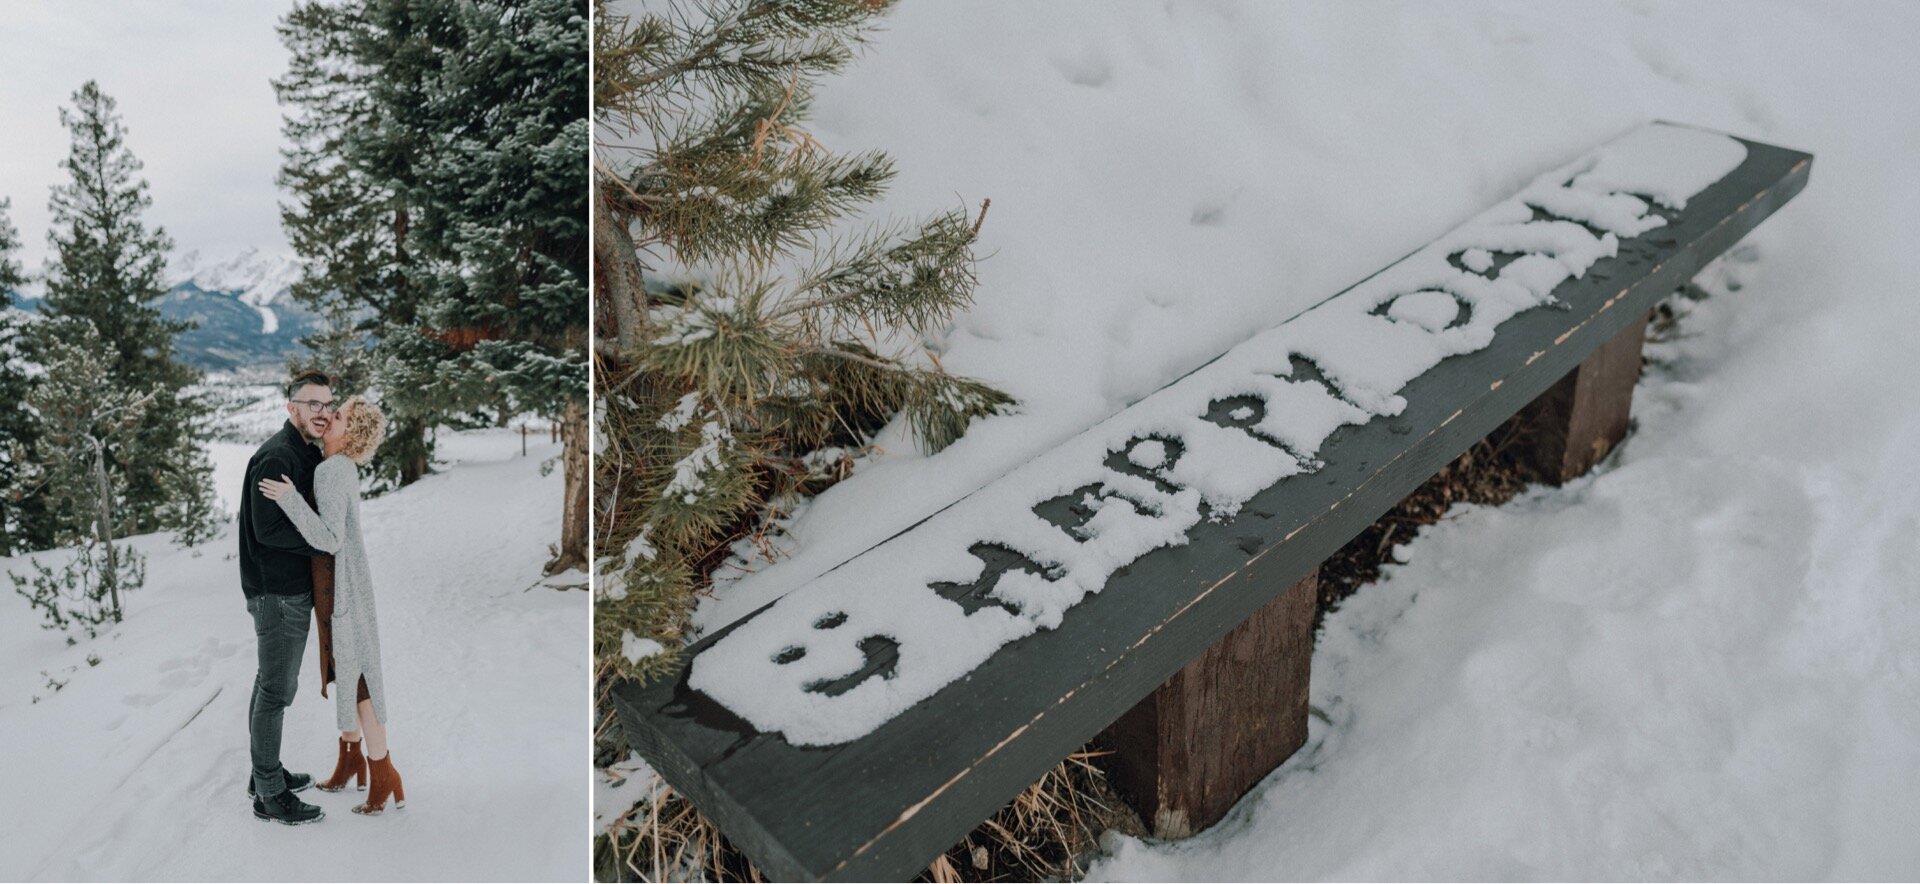 20_Kelsey&Taylor115_Kelsey&Taylor114_frisco_Photographer_engagement_Co_Hannah_Session_Photography_Minnesota_Snowy_Colorado_adventure_ampe_Mountain_engaged.jpg